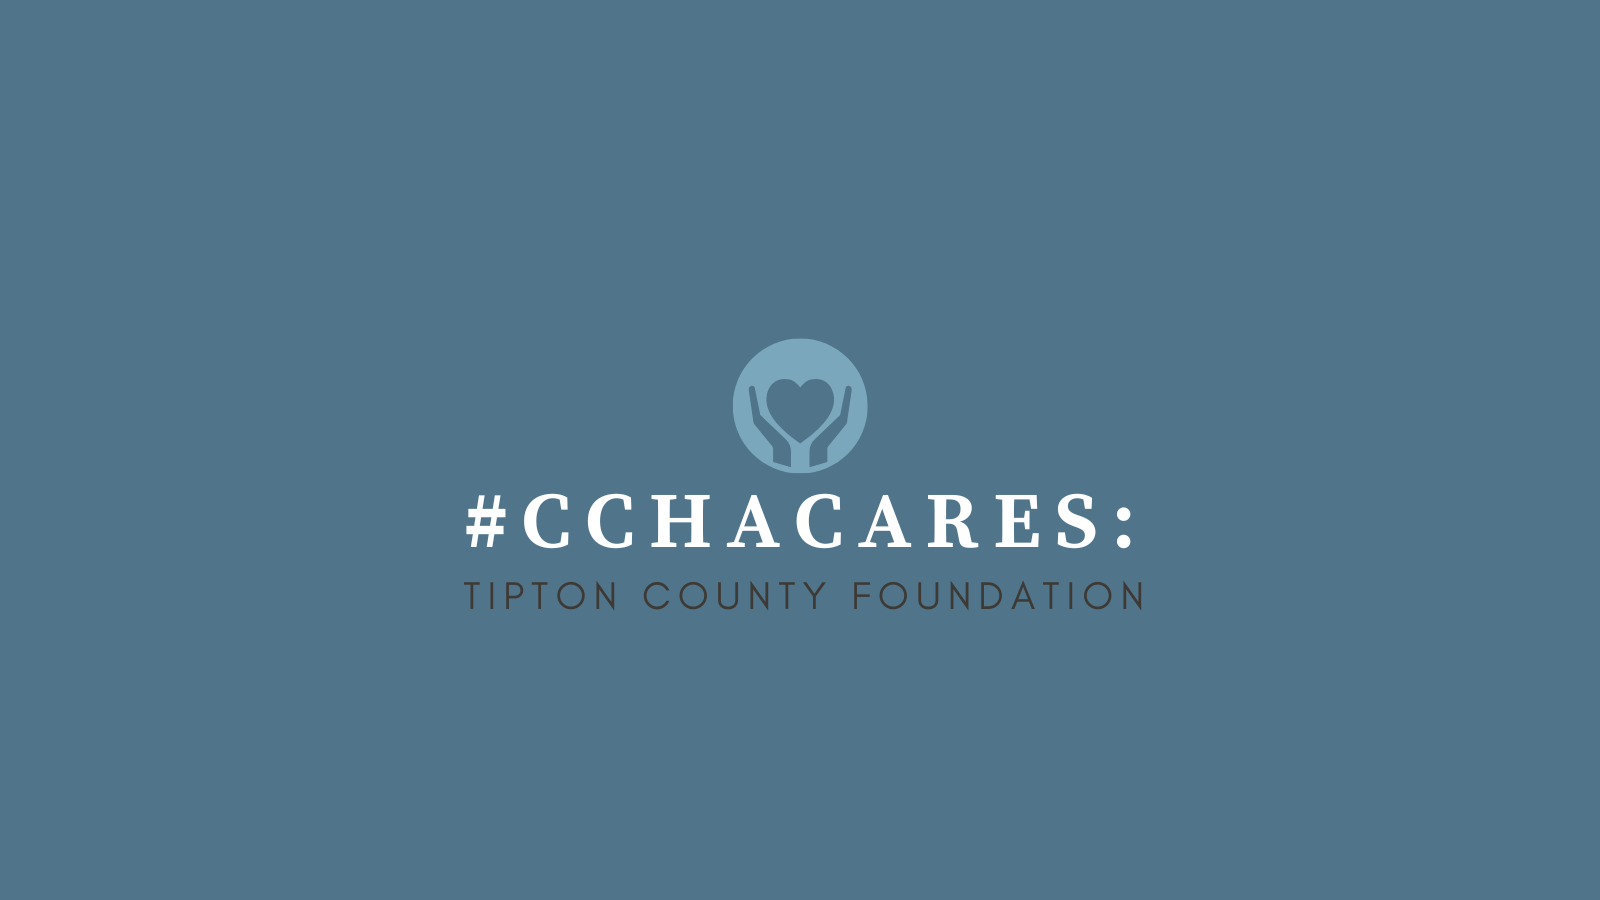 CCHA Cares tipton county foundation twitter blog